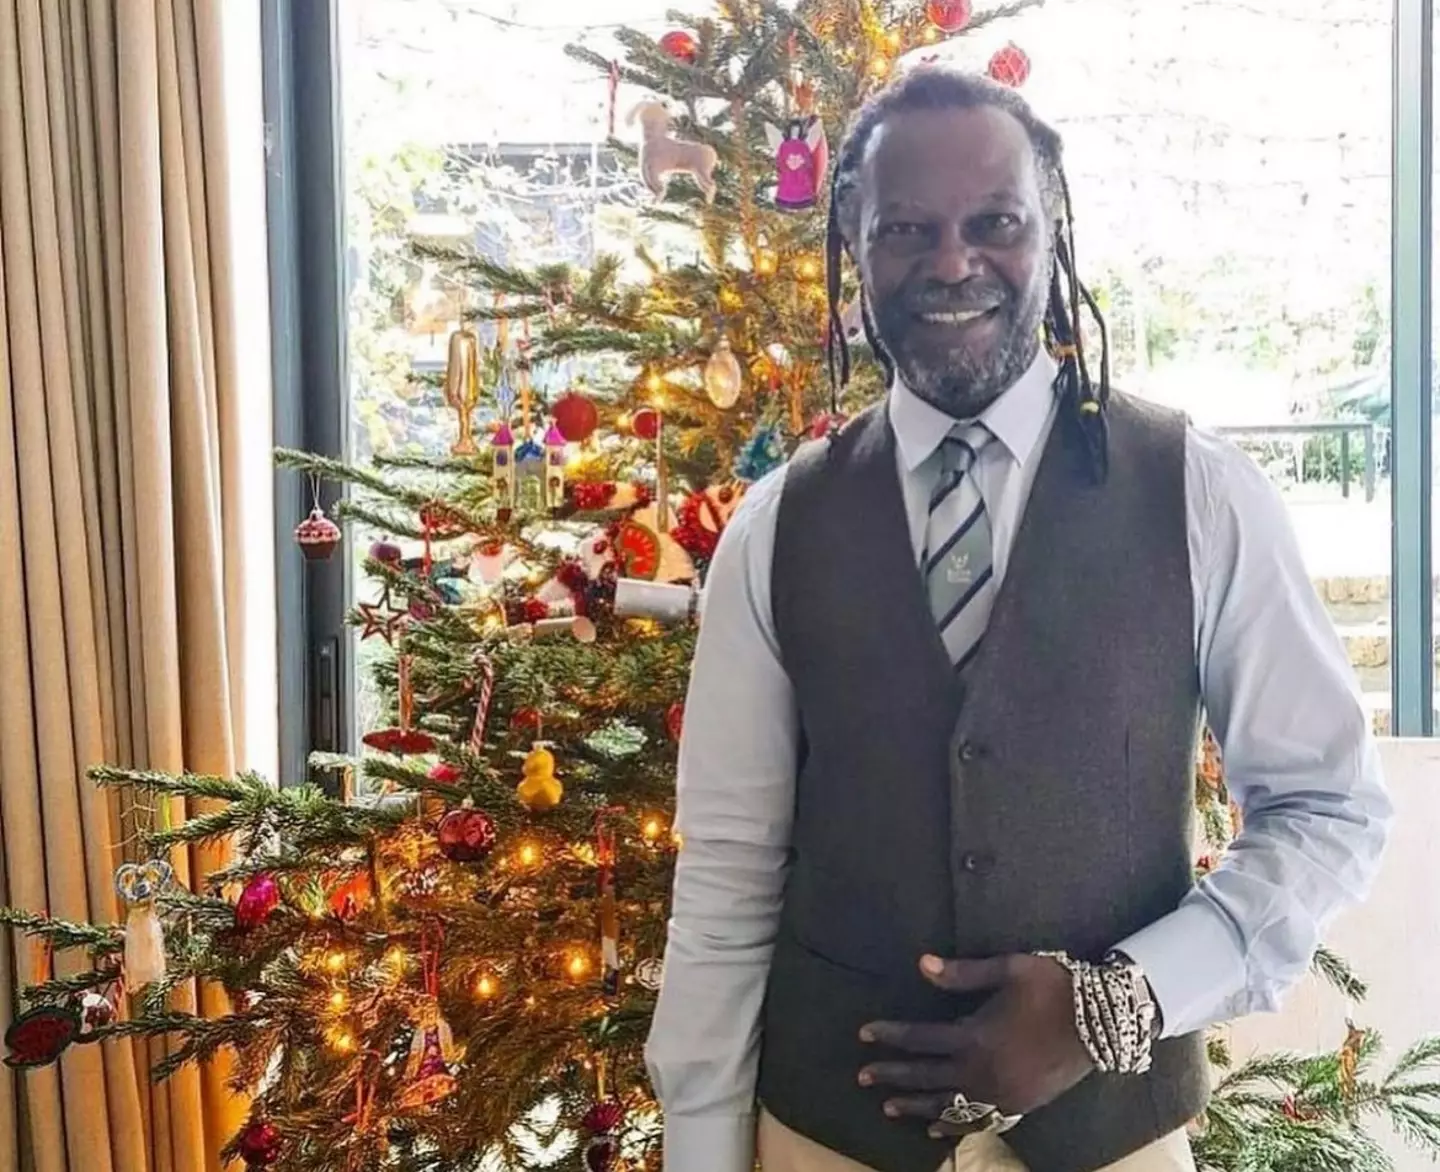 Levi Roots is said to have 'exciting projects' lined up.